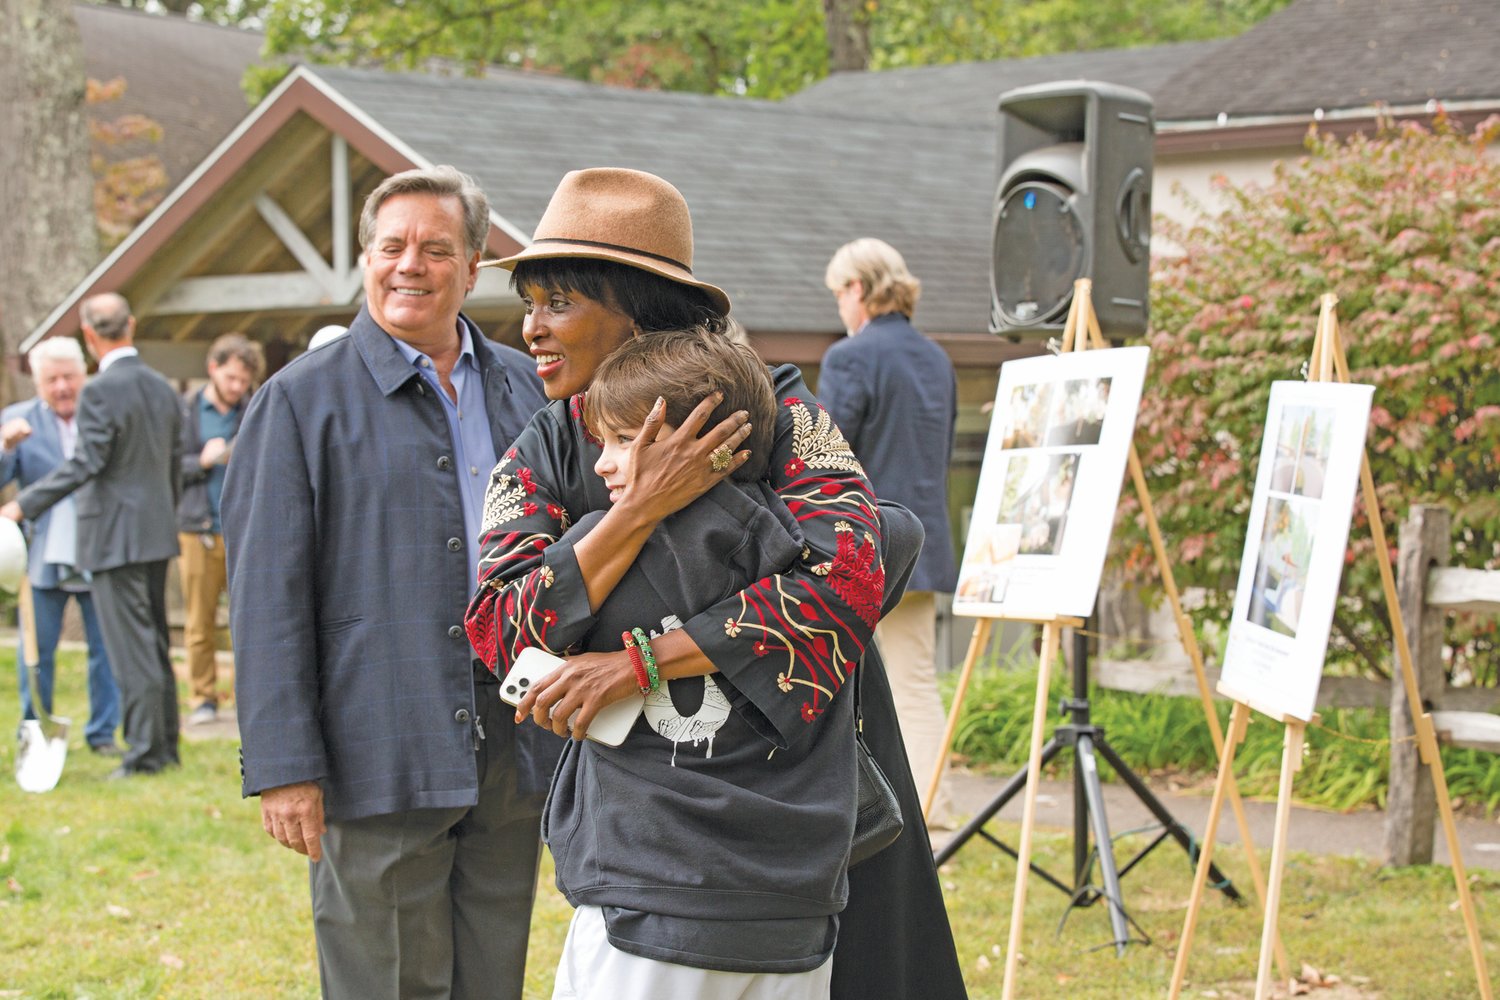 Buckingham Friends School parent Leila Yusuf gives student Zack Schmukler a hug during the groundbreaking ceremony for a multi-million dollar expansion project on the school’s 44-acre campus in Lahaska.